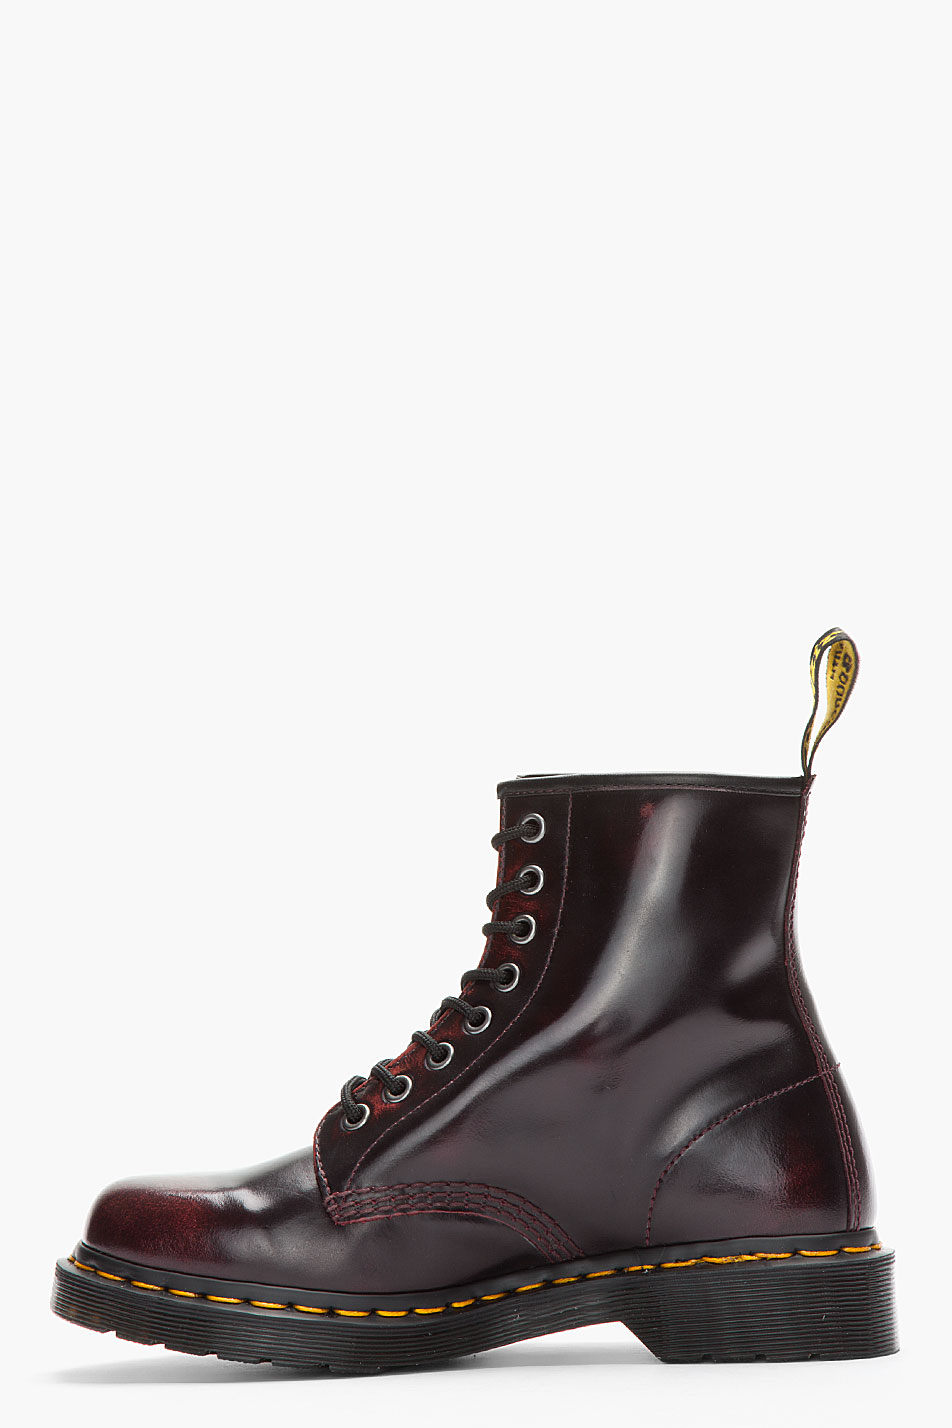 Dr. Martens Burgundy Brushed Leather 8eye Boots in Red for Men - Lyst